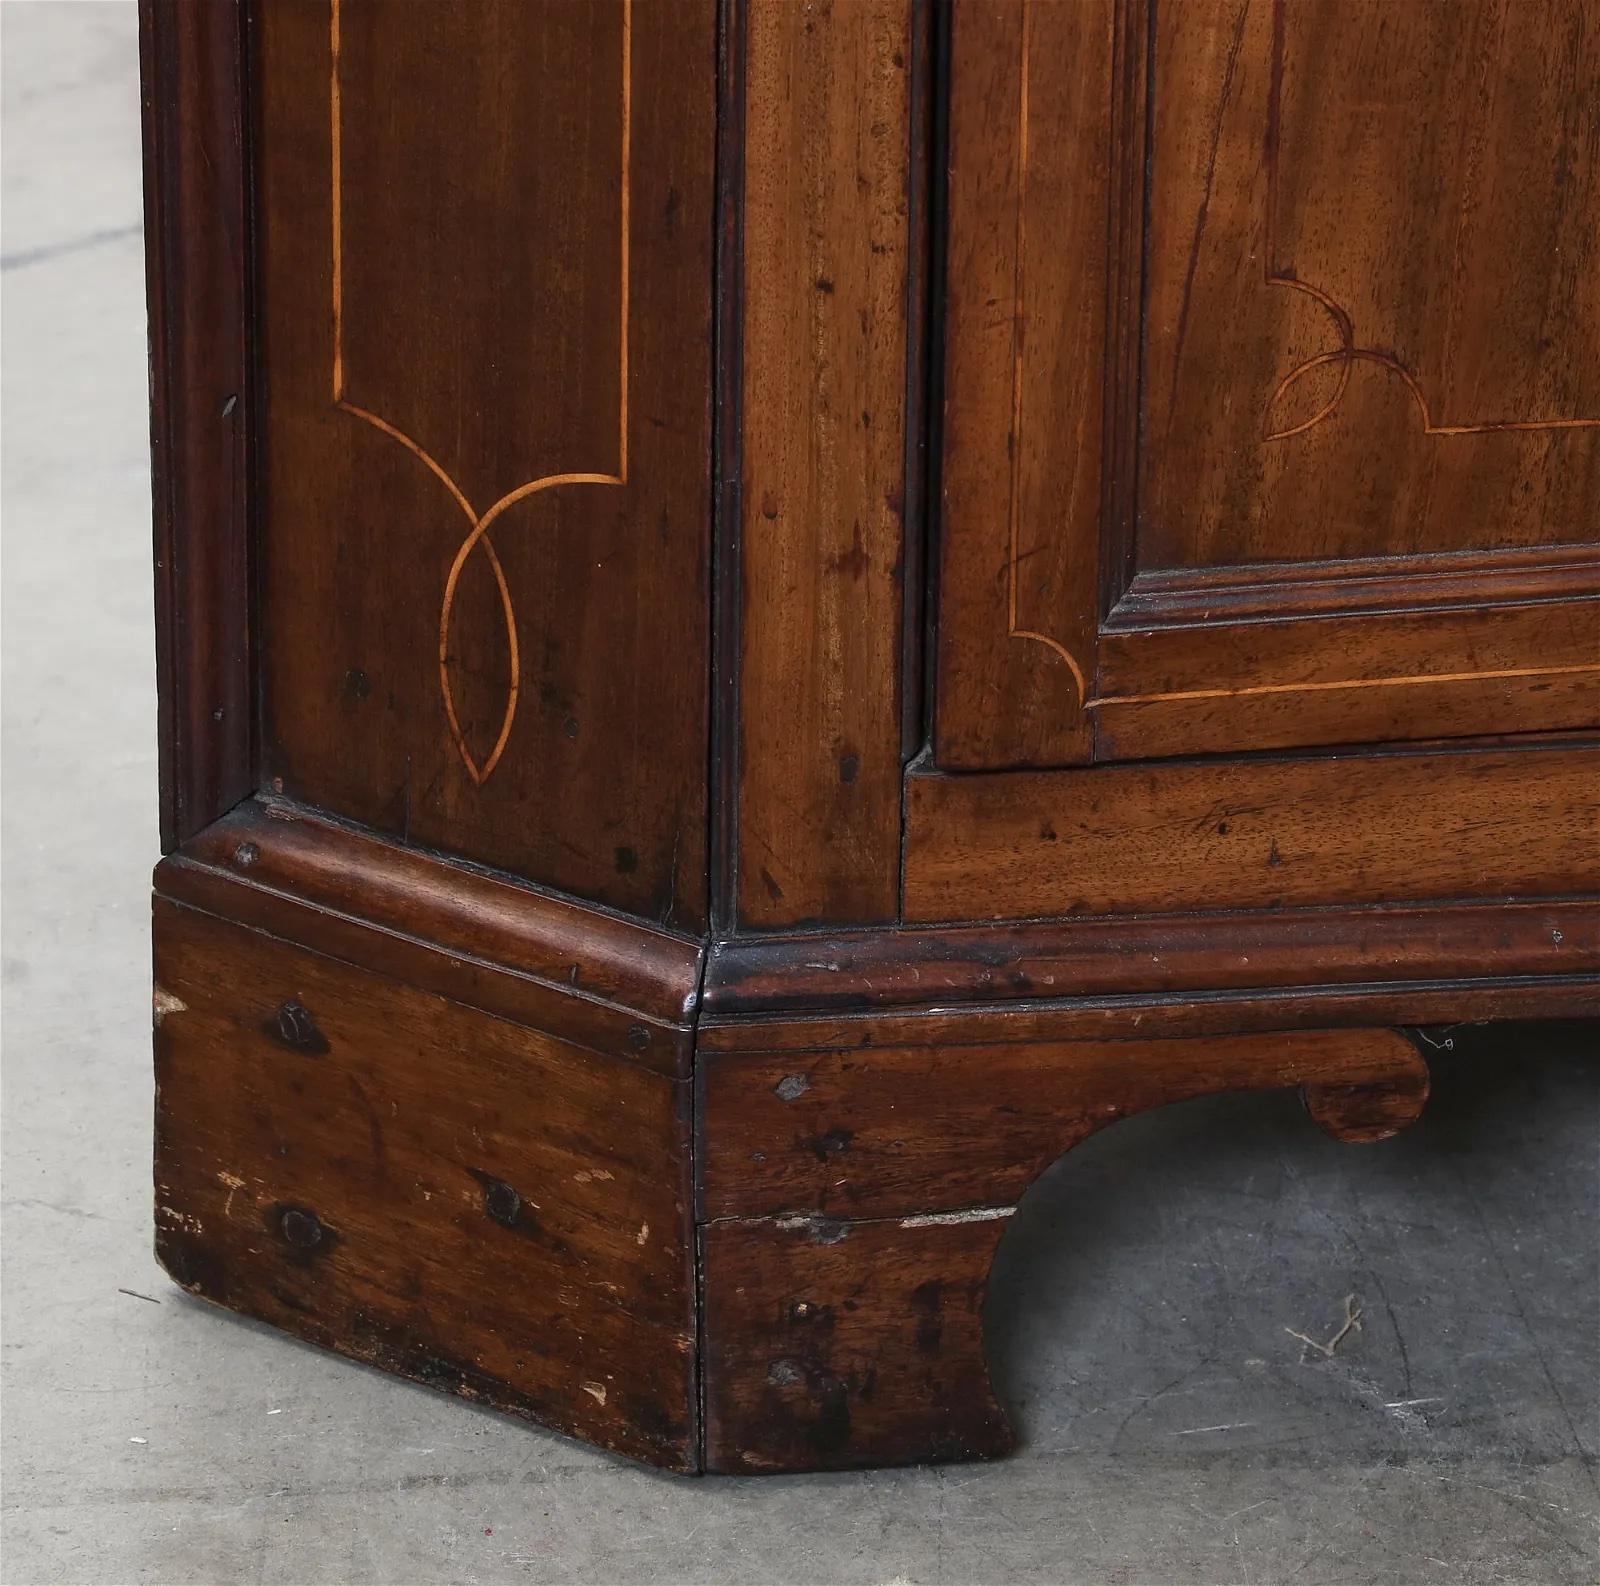 Brass Late 1700's American Federal Inlaid Mahogany Corner Cabinet w/ Dentil Molding For Sale